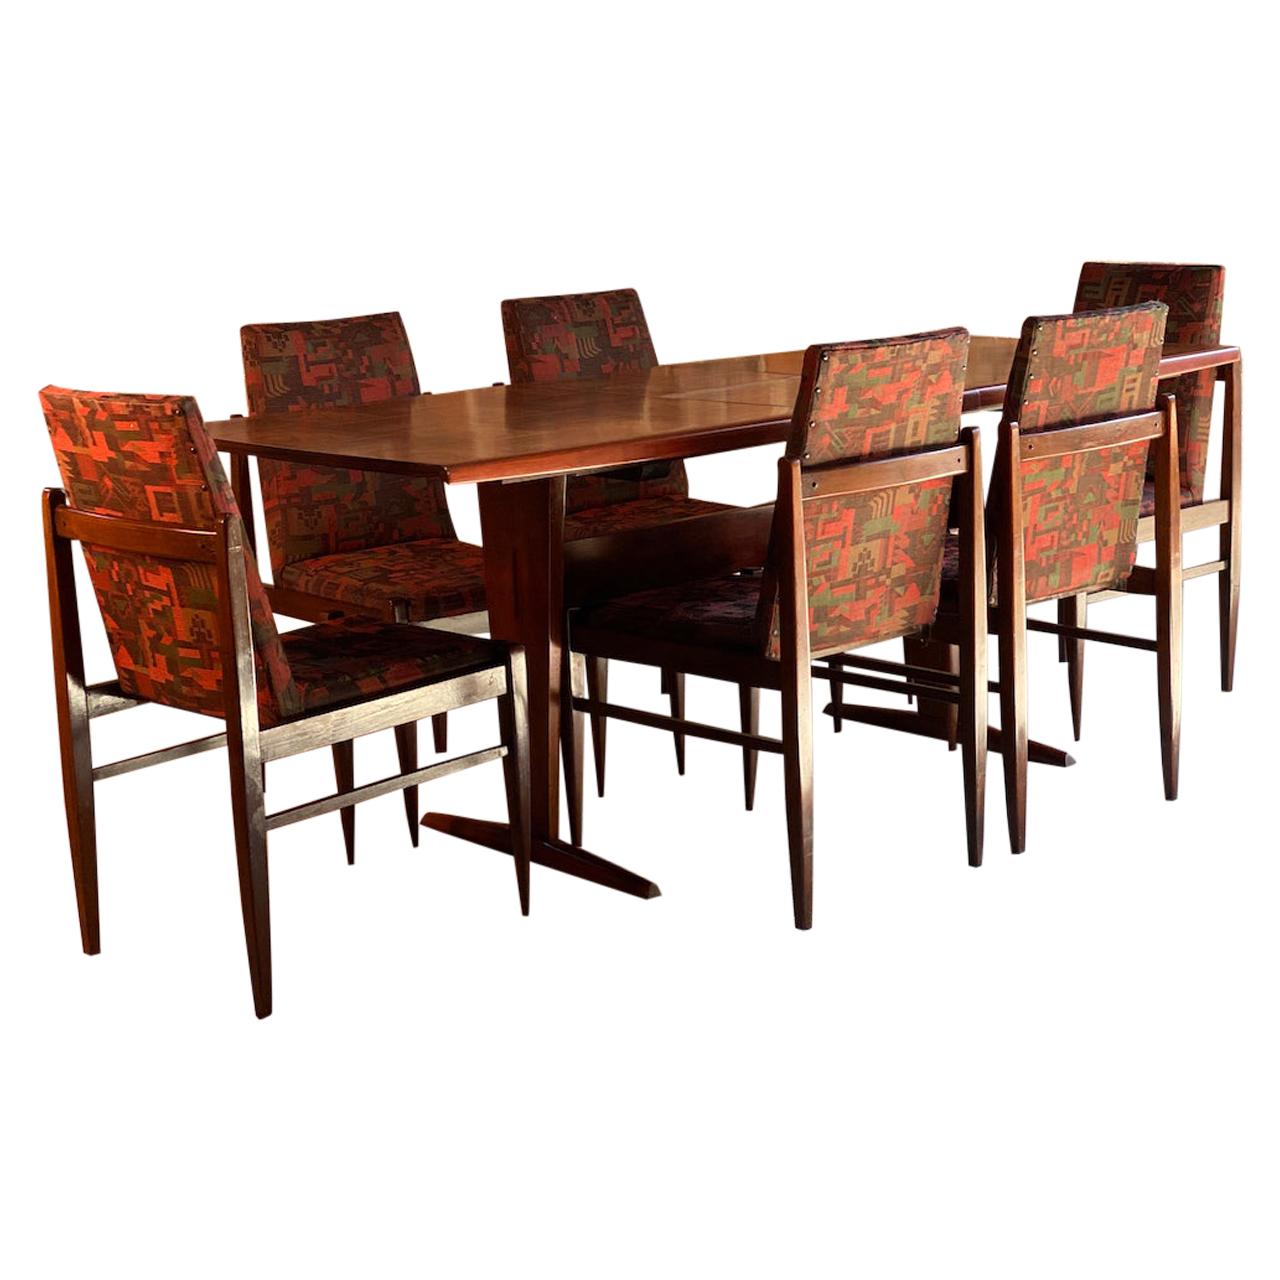 Guiseppe Scapinelli Jacaranda Rosewood Patchwork Dining Table & Chairs, 1950s